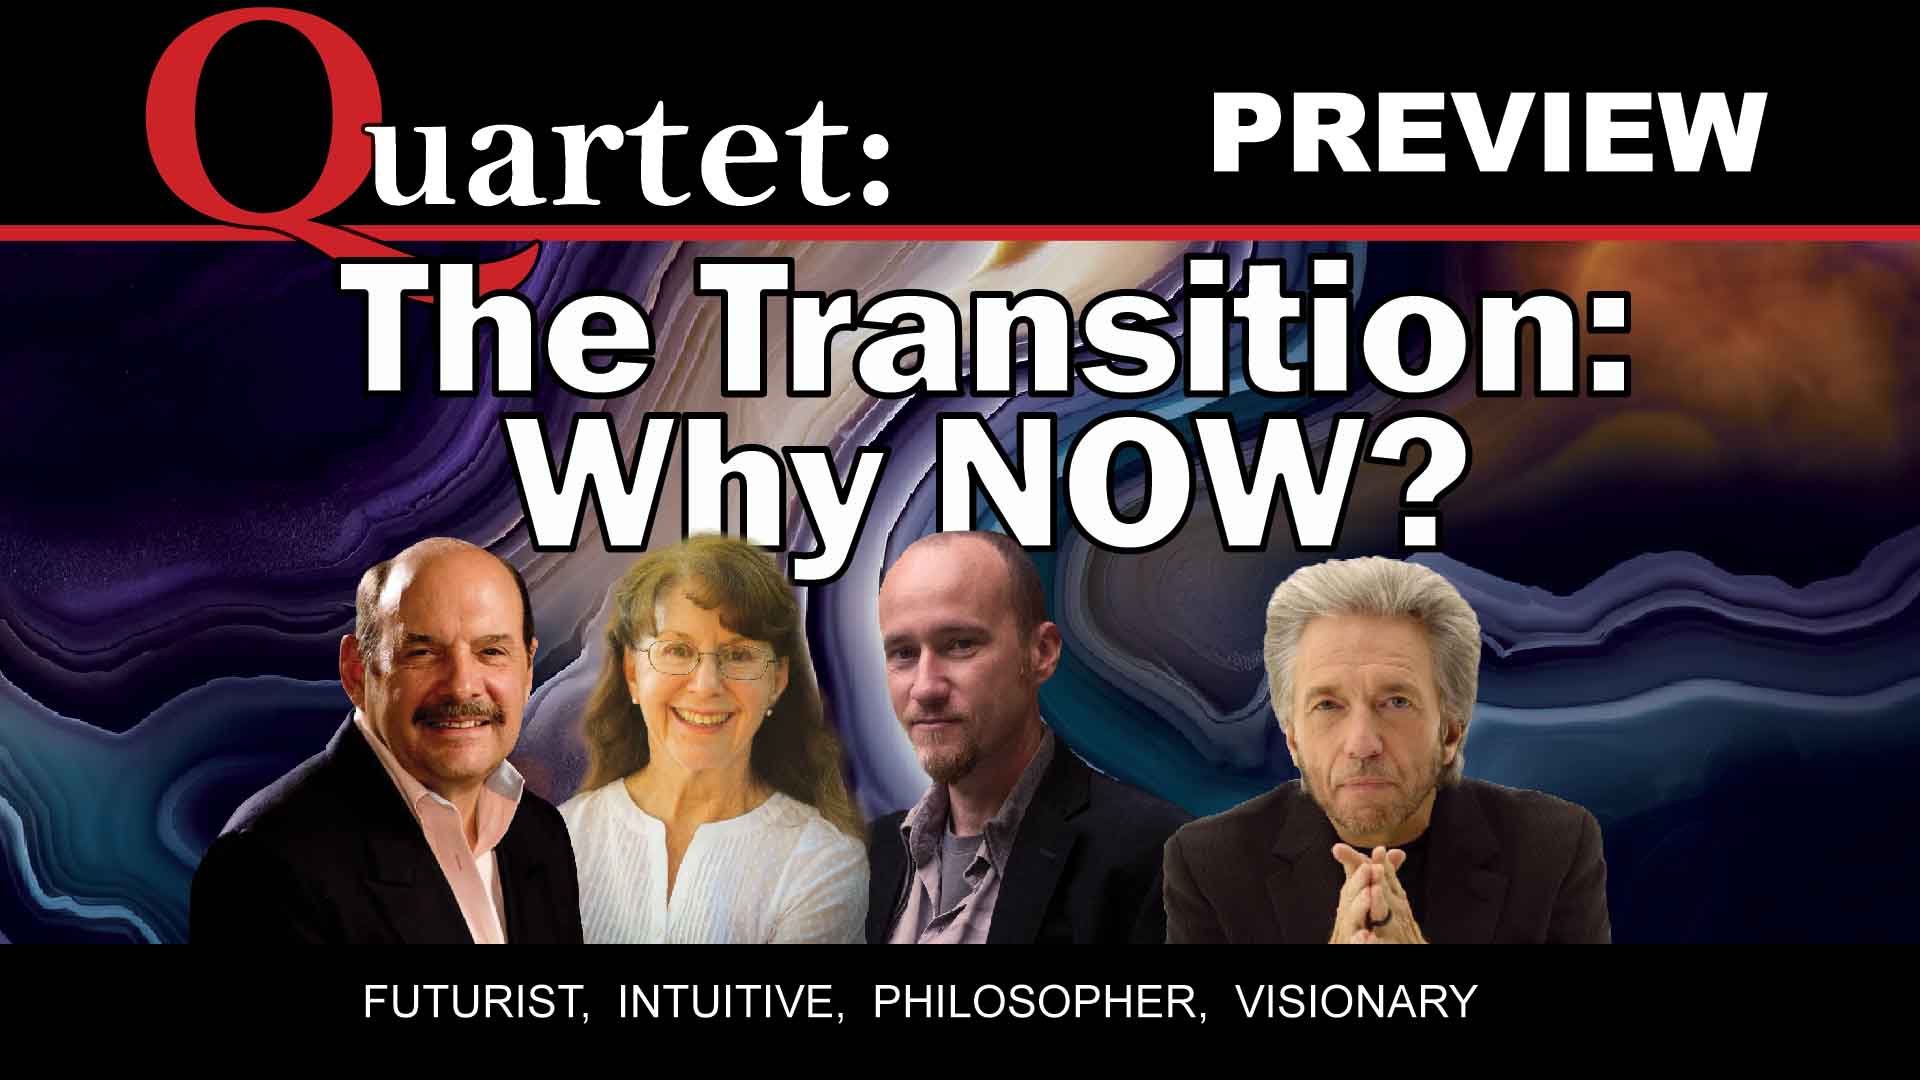 Quartet Preview, The Transition: Why Now?